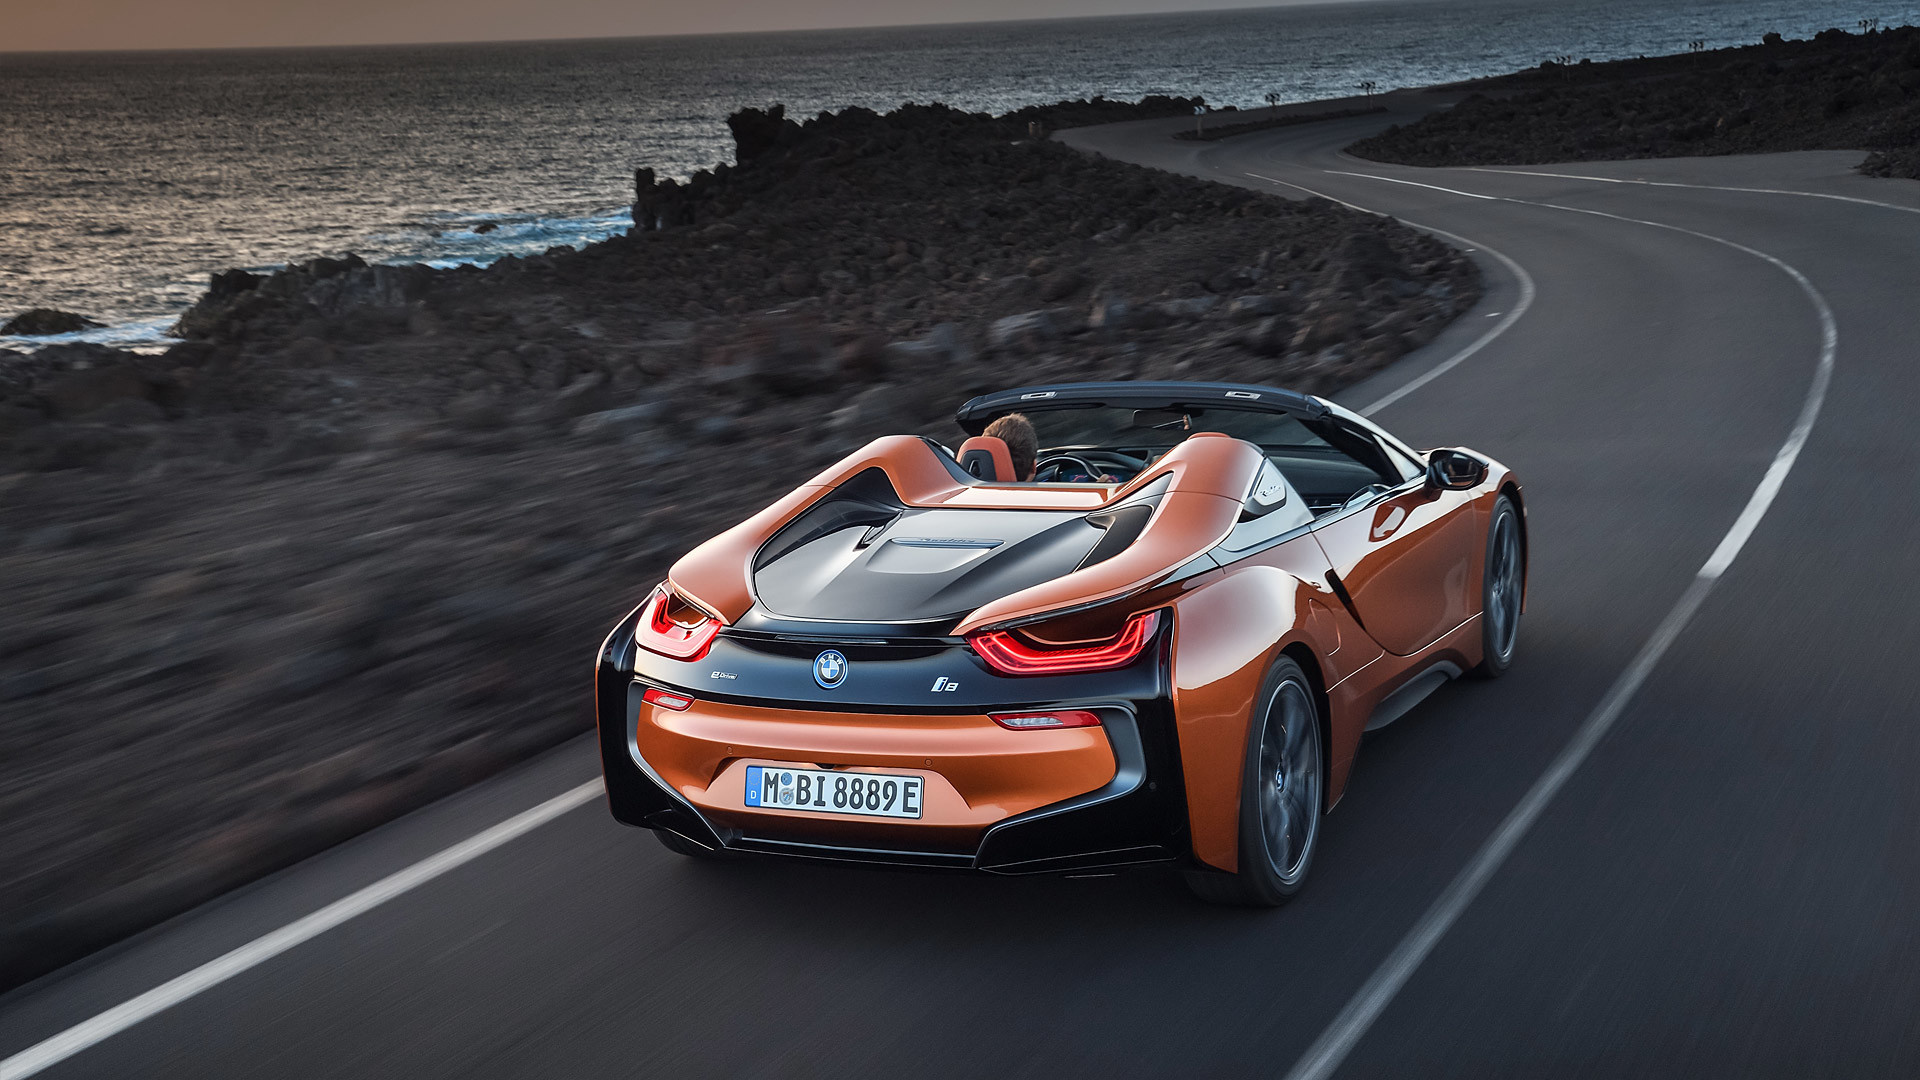 BMW i8, Stunning wallpapers, Automotive excellence, Unmatched power, Captivating design, 1920x1080 Full HD Desktop